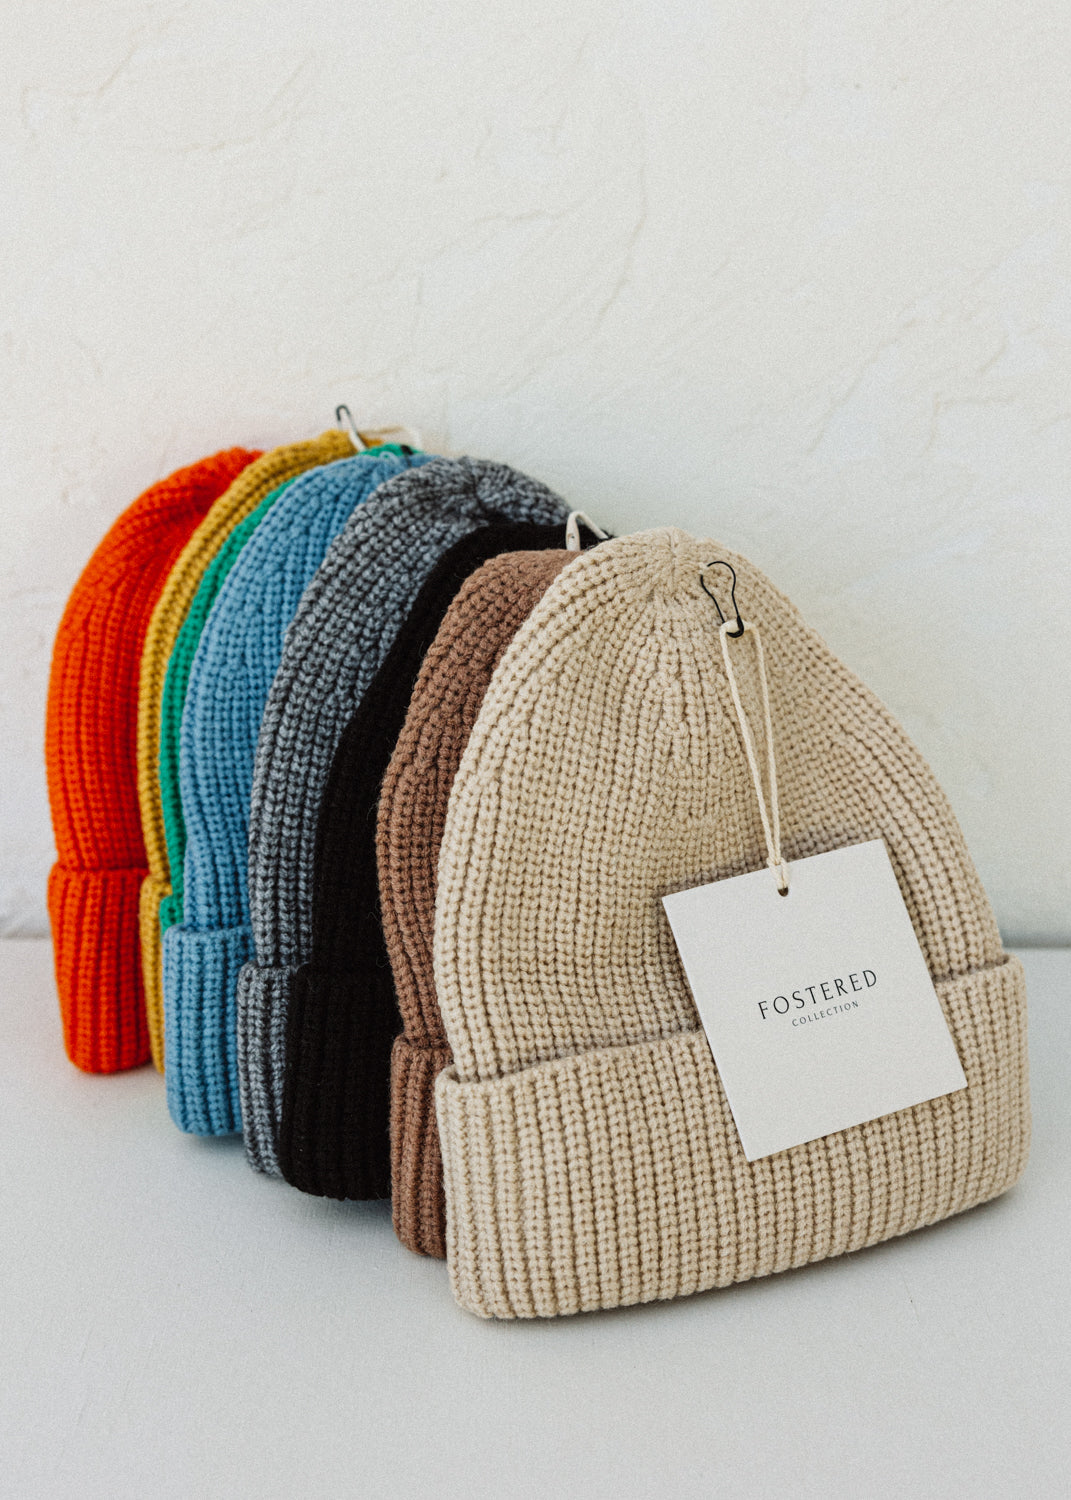 Fostered Collection Knitted Beanies